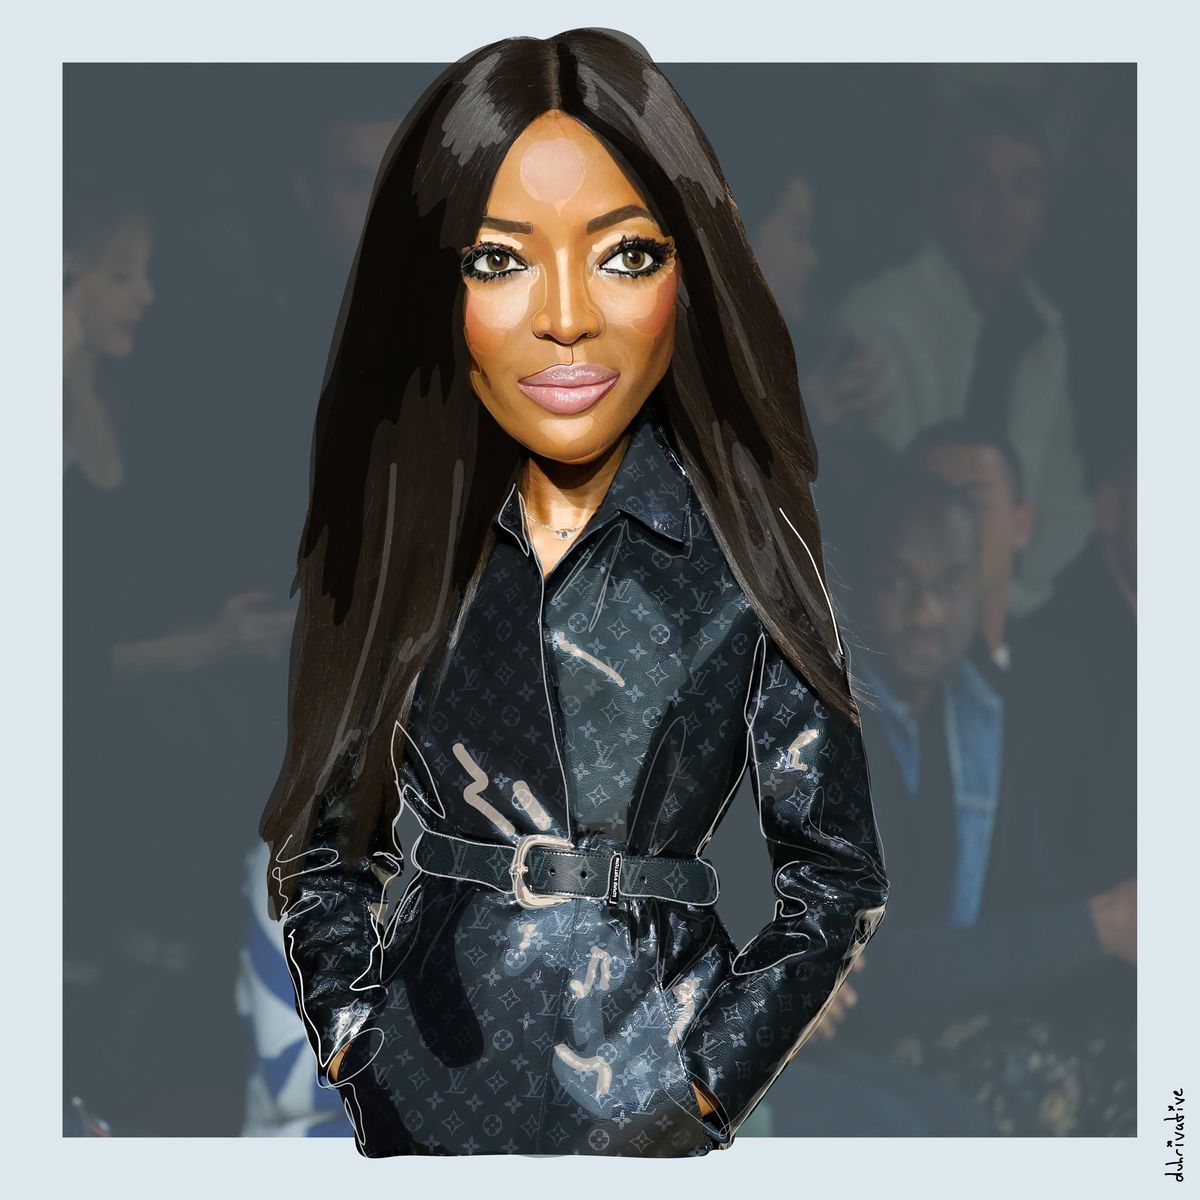 Cilia Van storm wit Is Naomi Campbell the Most Powerful Person in Fashion? - PAPER Magazine